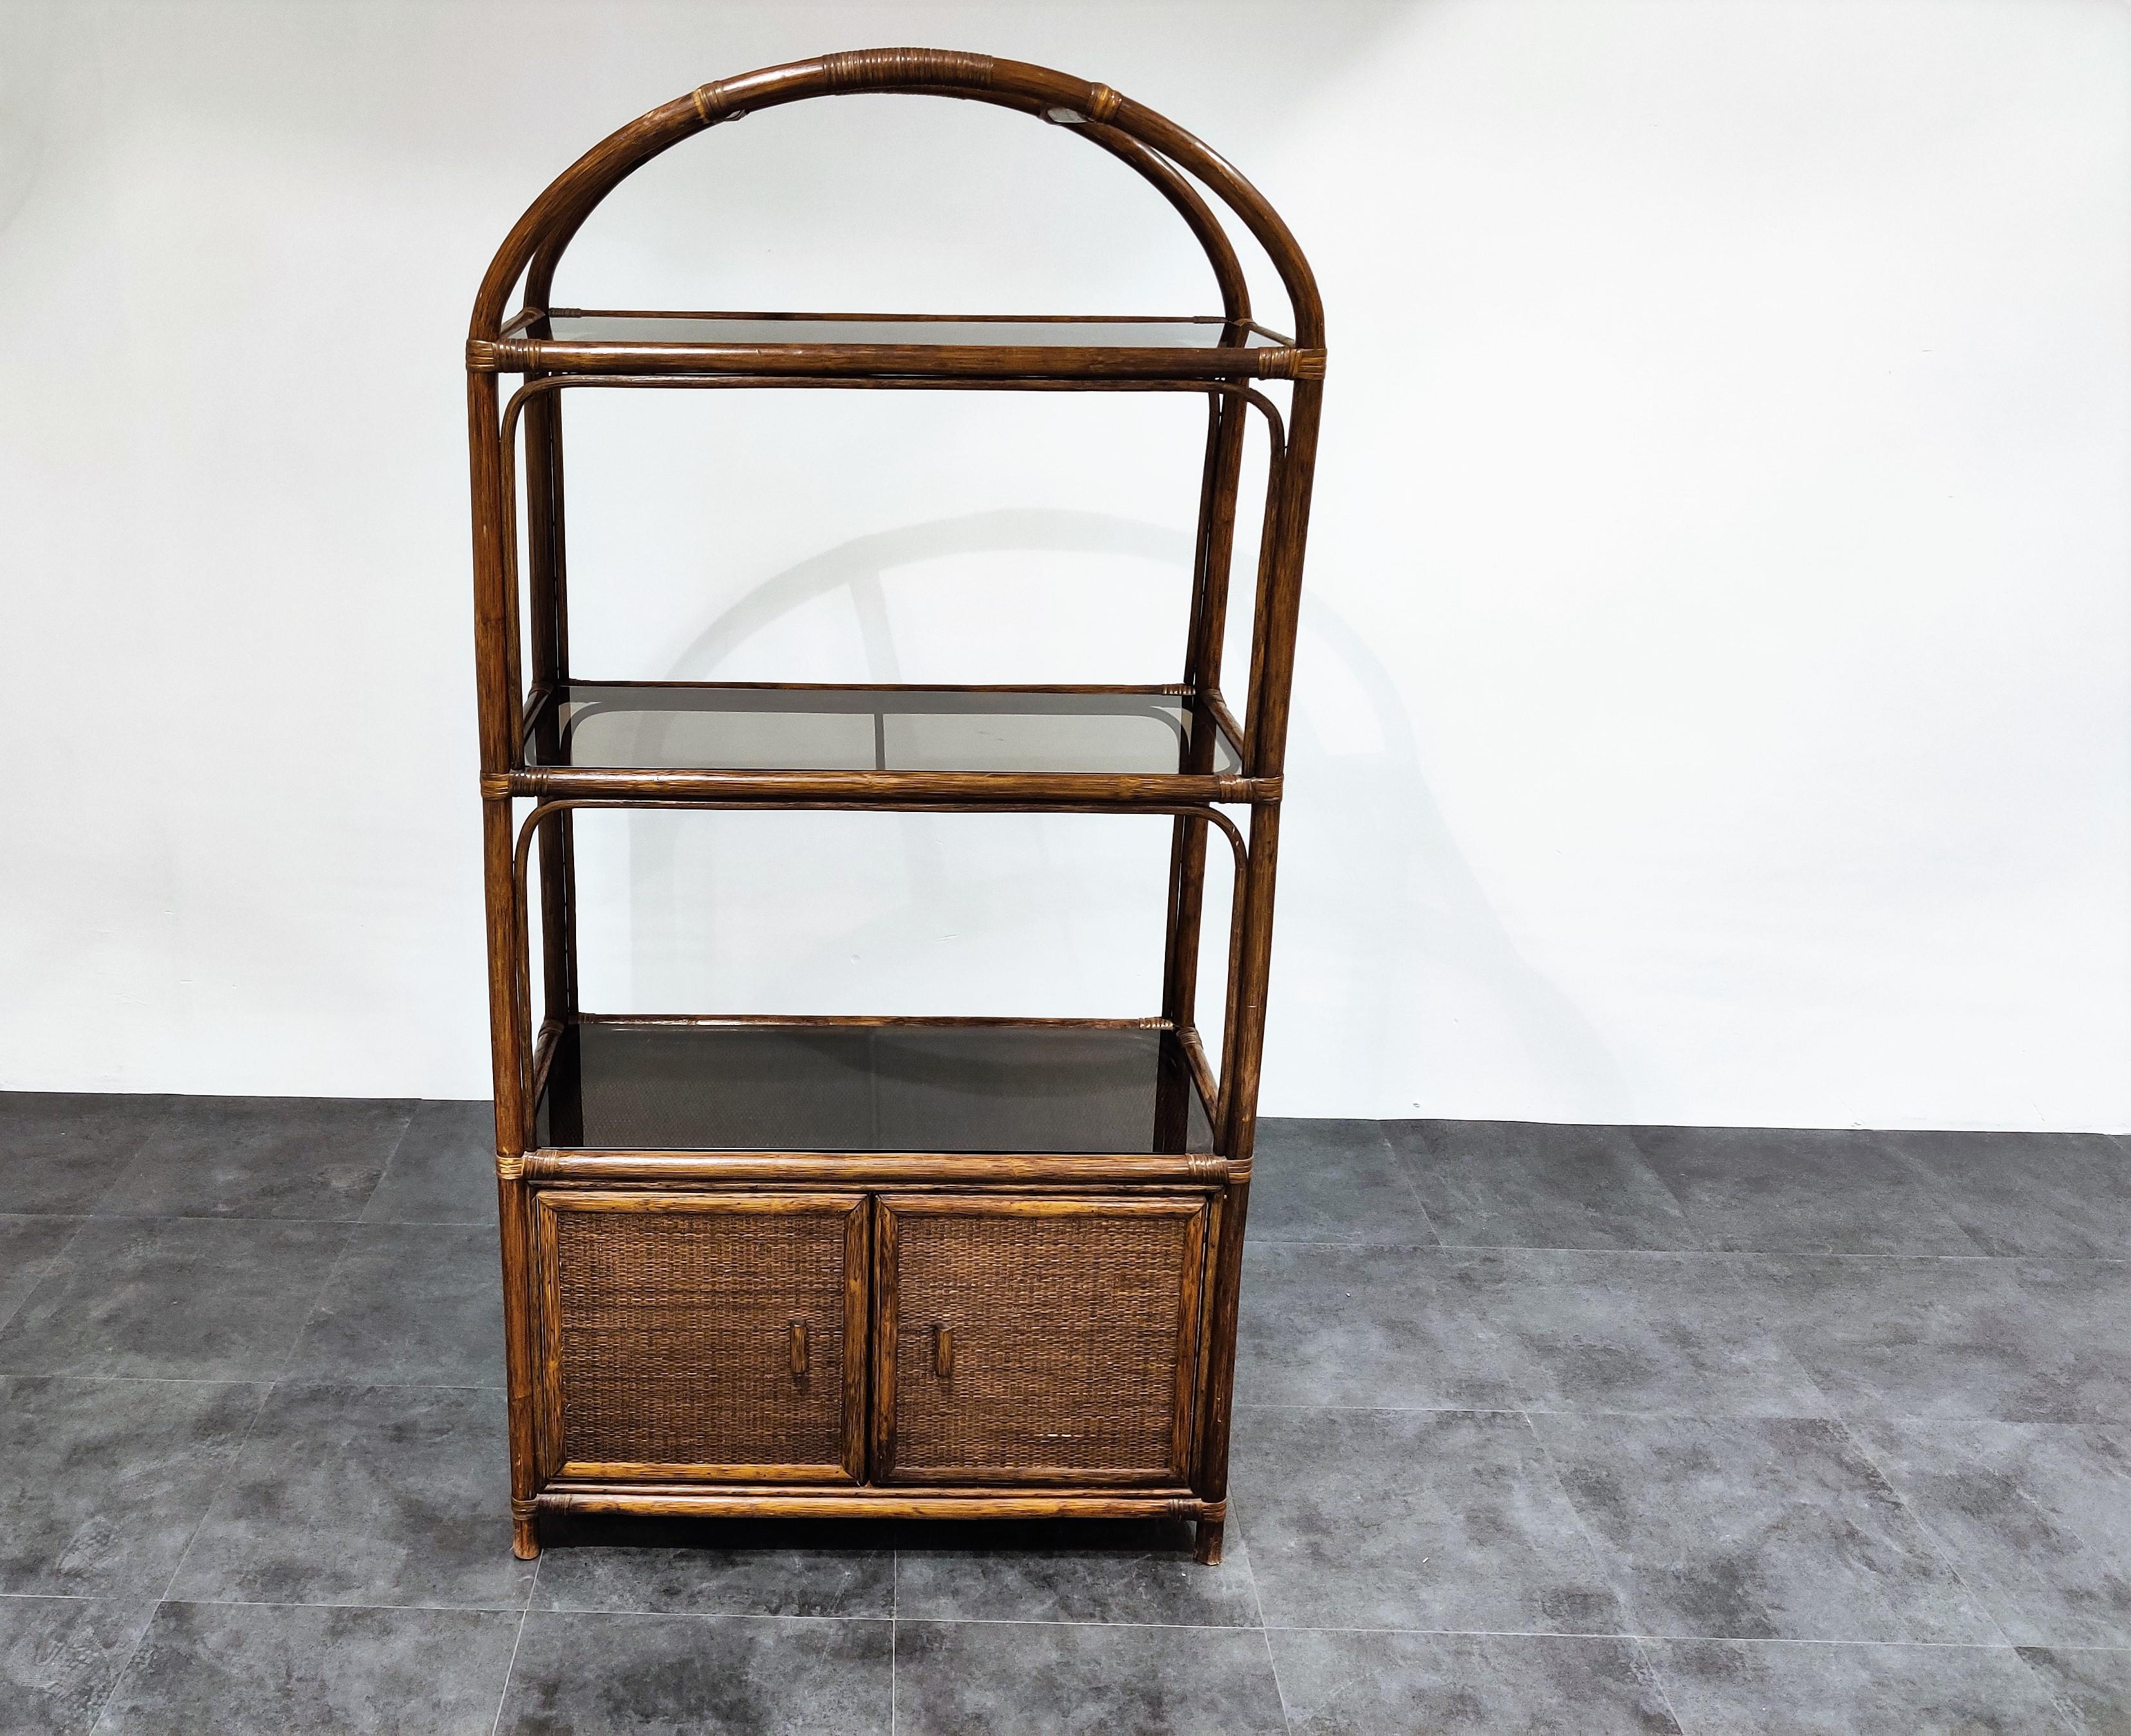 Midcentury rattan and bent wooden étagère or bookcase with two doors.

This étagère has also 3 smoked glass shelves.

Great piece for in a bathroom, entryway or living room.

Good condition.

1970s, Netherlands

Dimensions:
Height